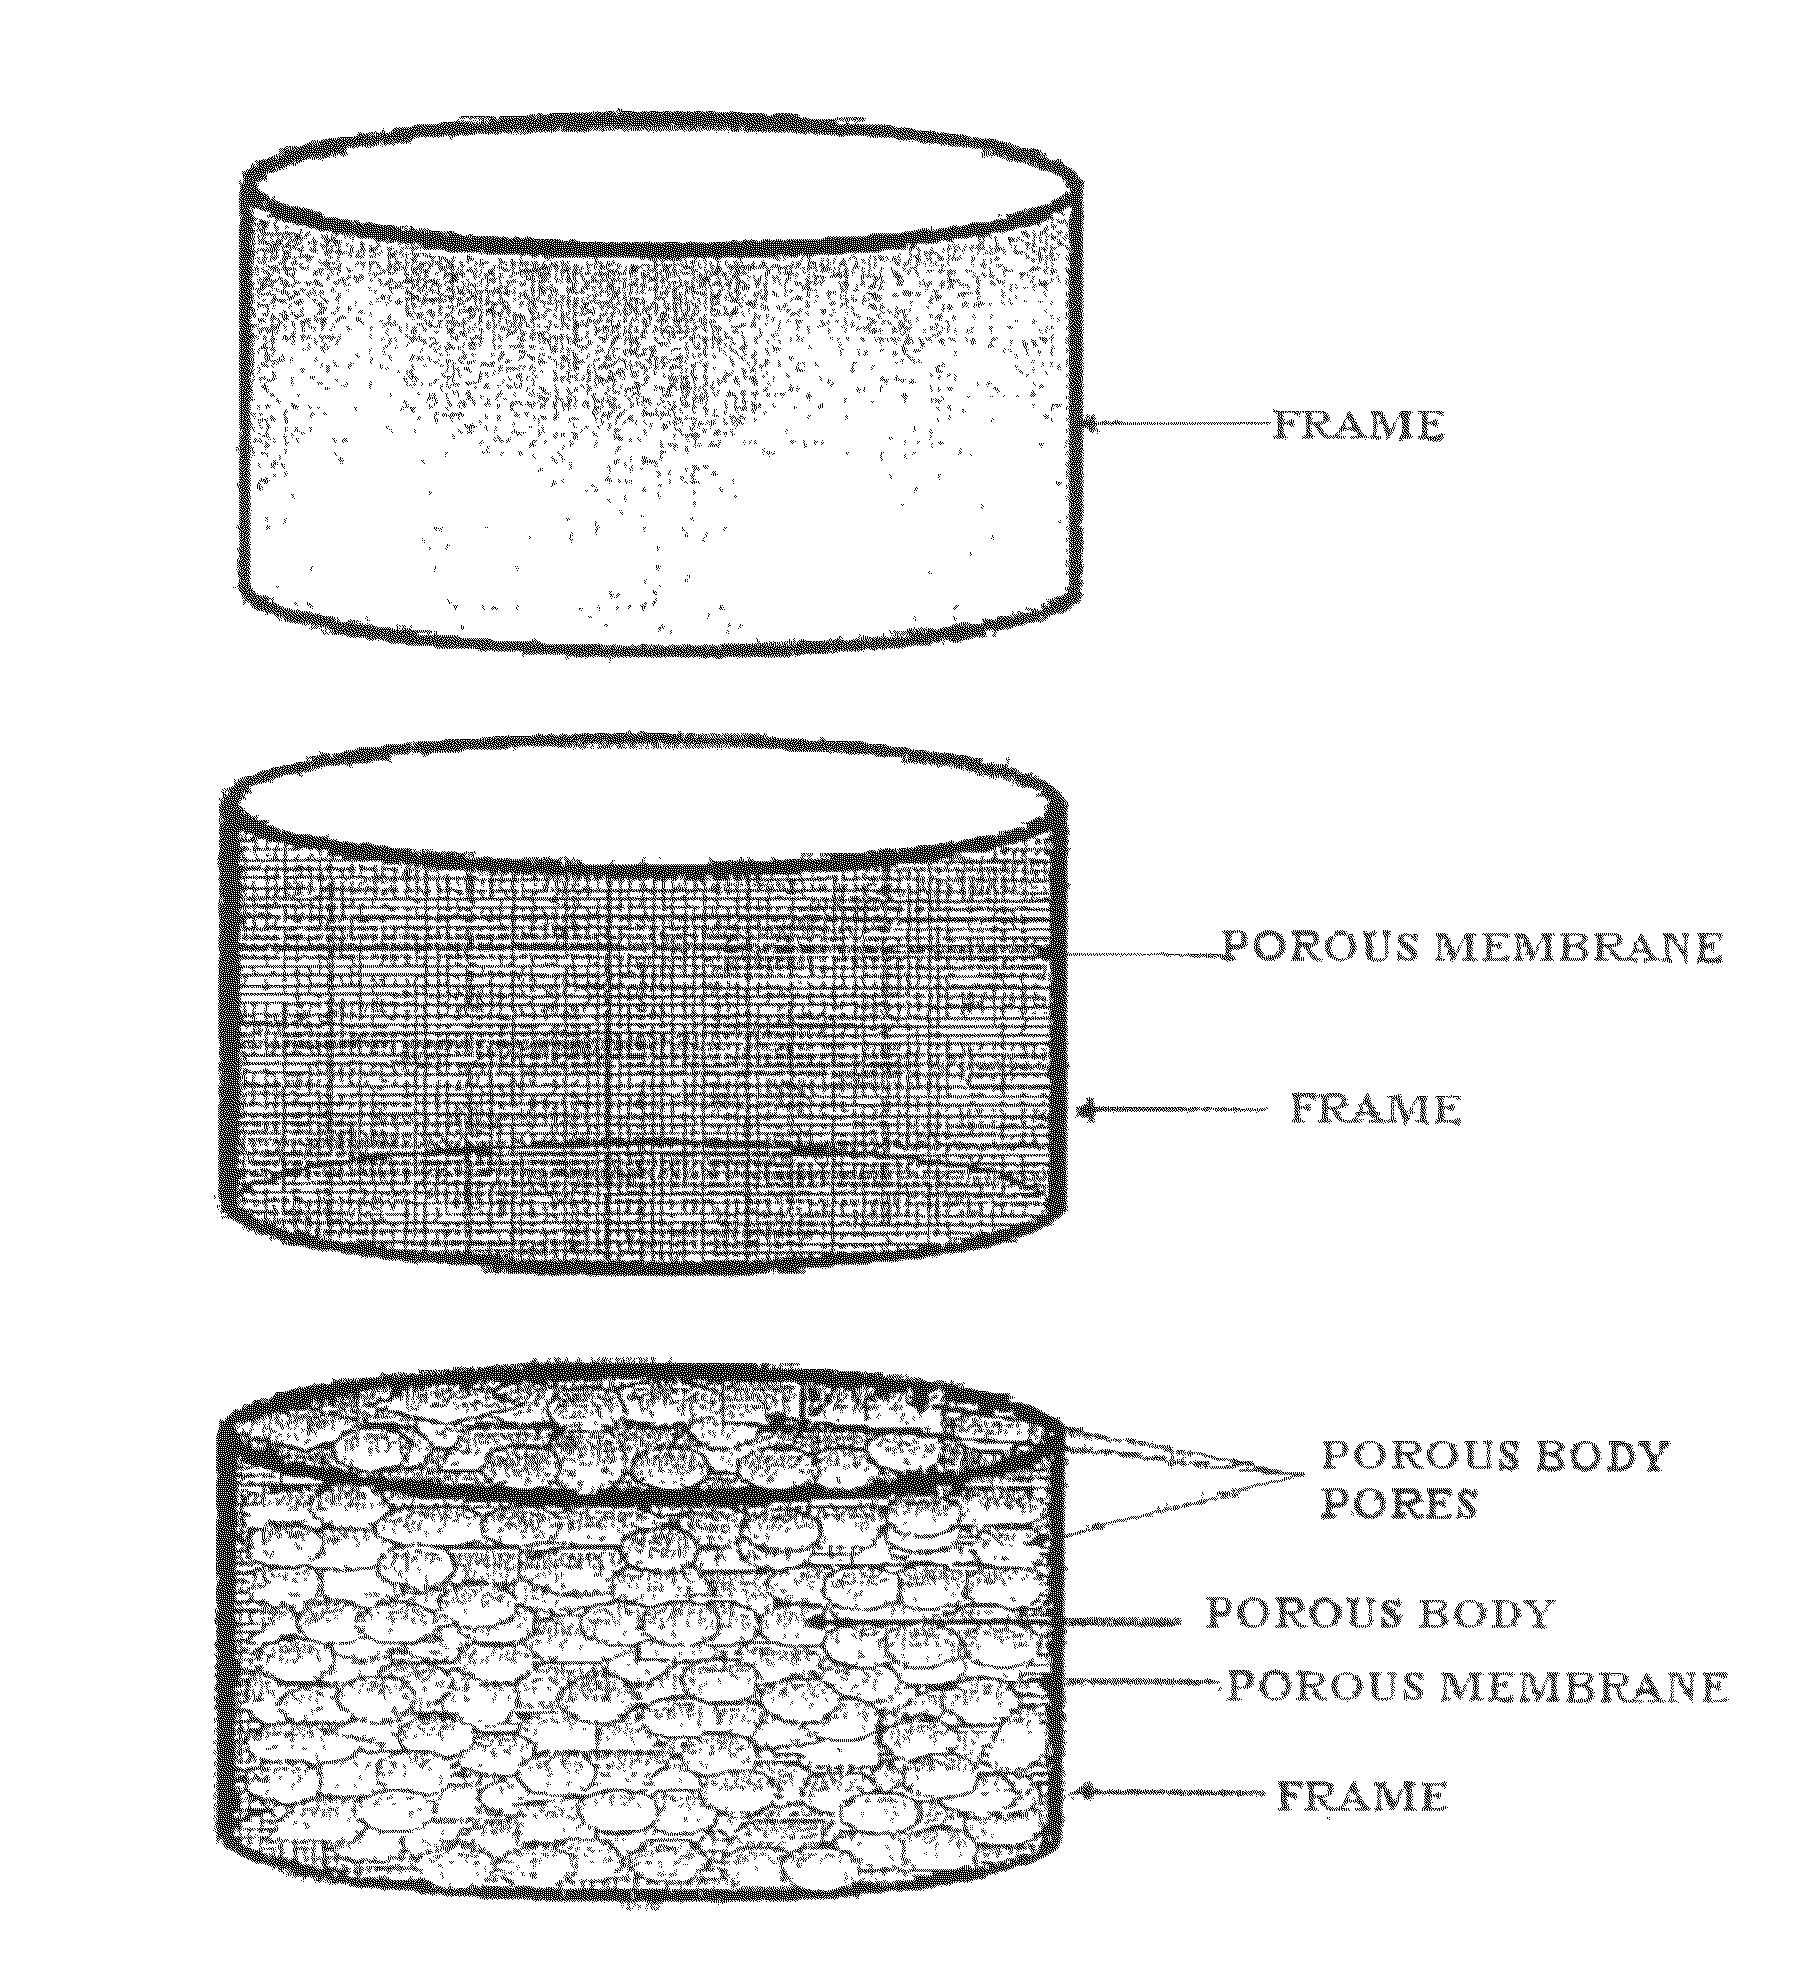 Porous scaffold, method of producing the same and method of using the porous scaffold